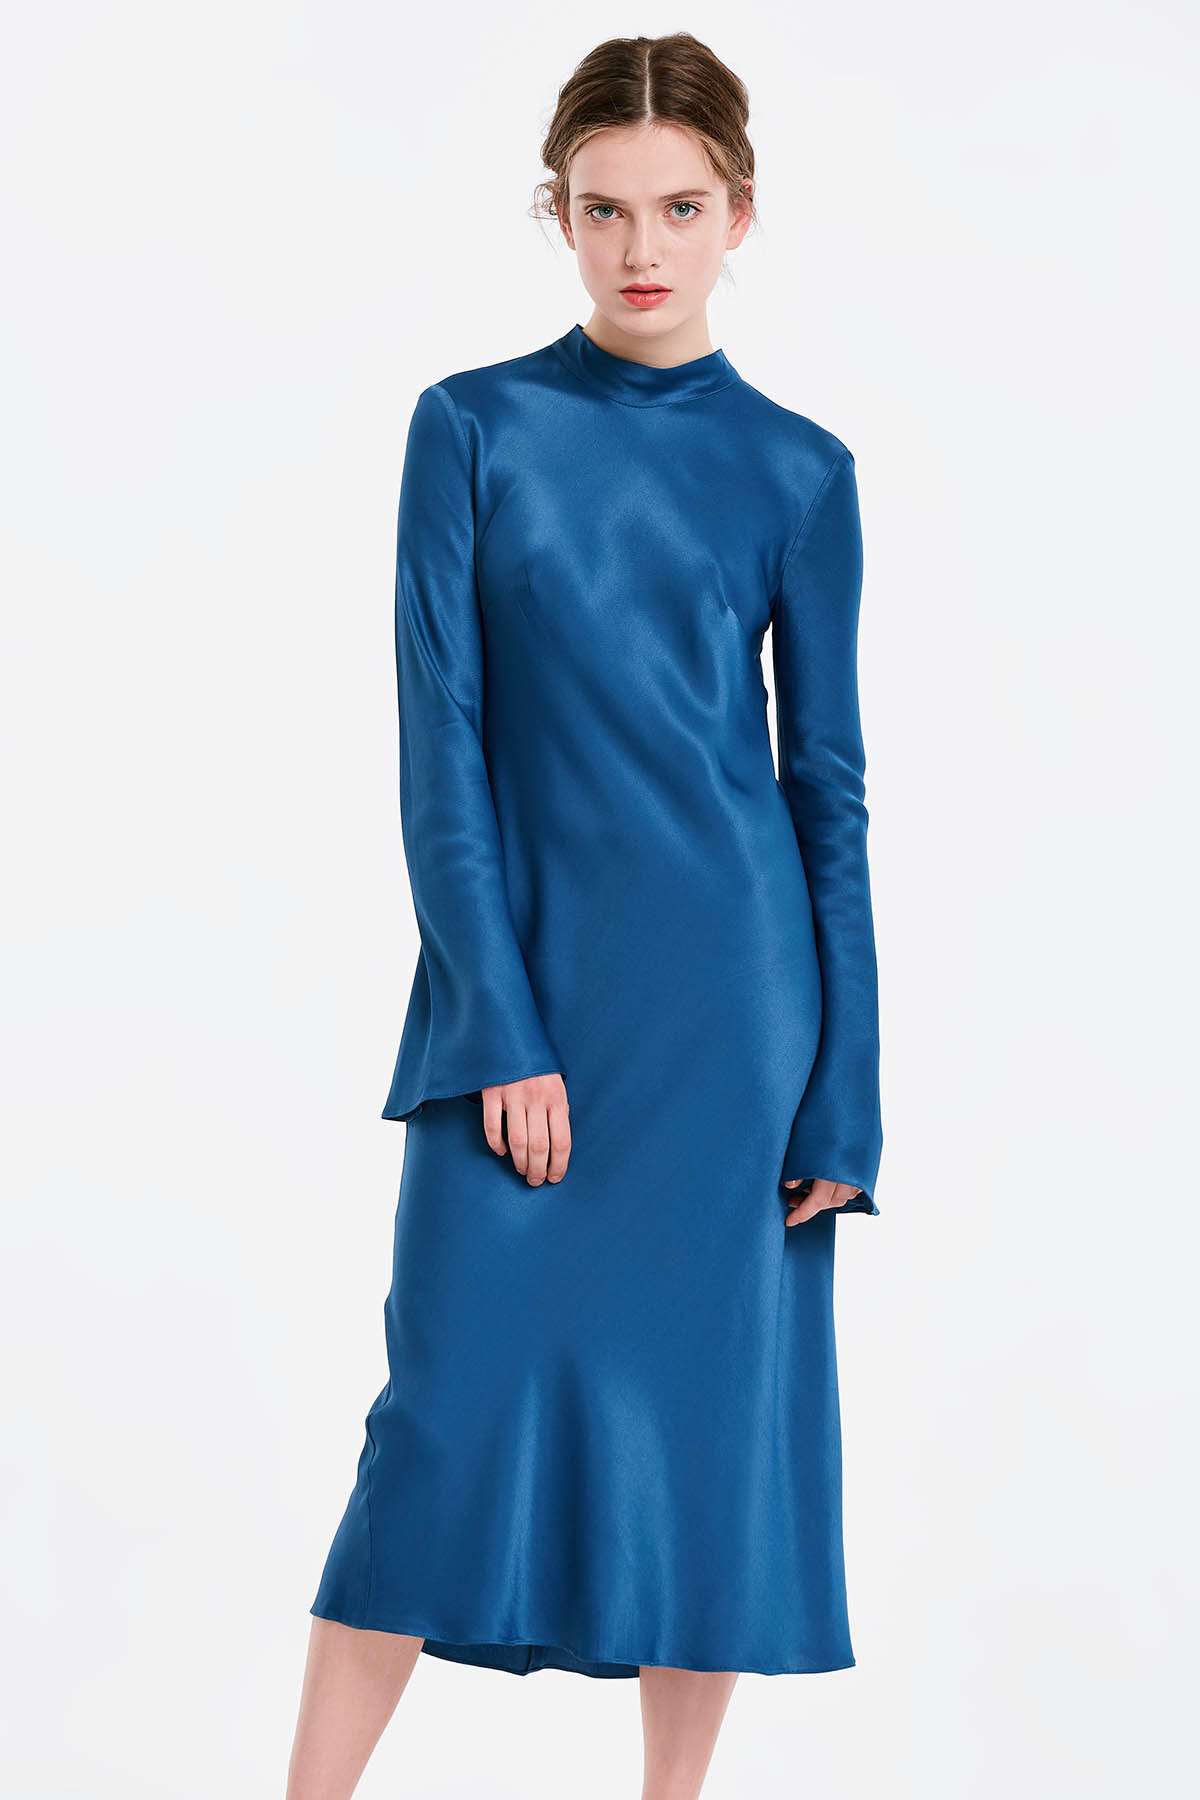 Blue dress with a bow at the back and flared sleeves, photo 1